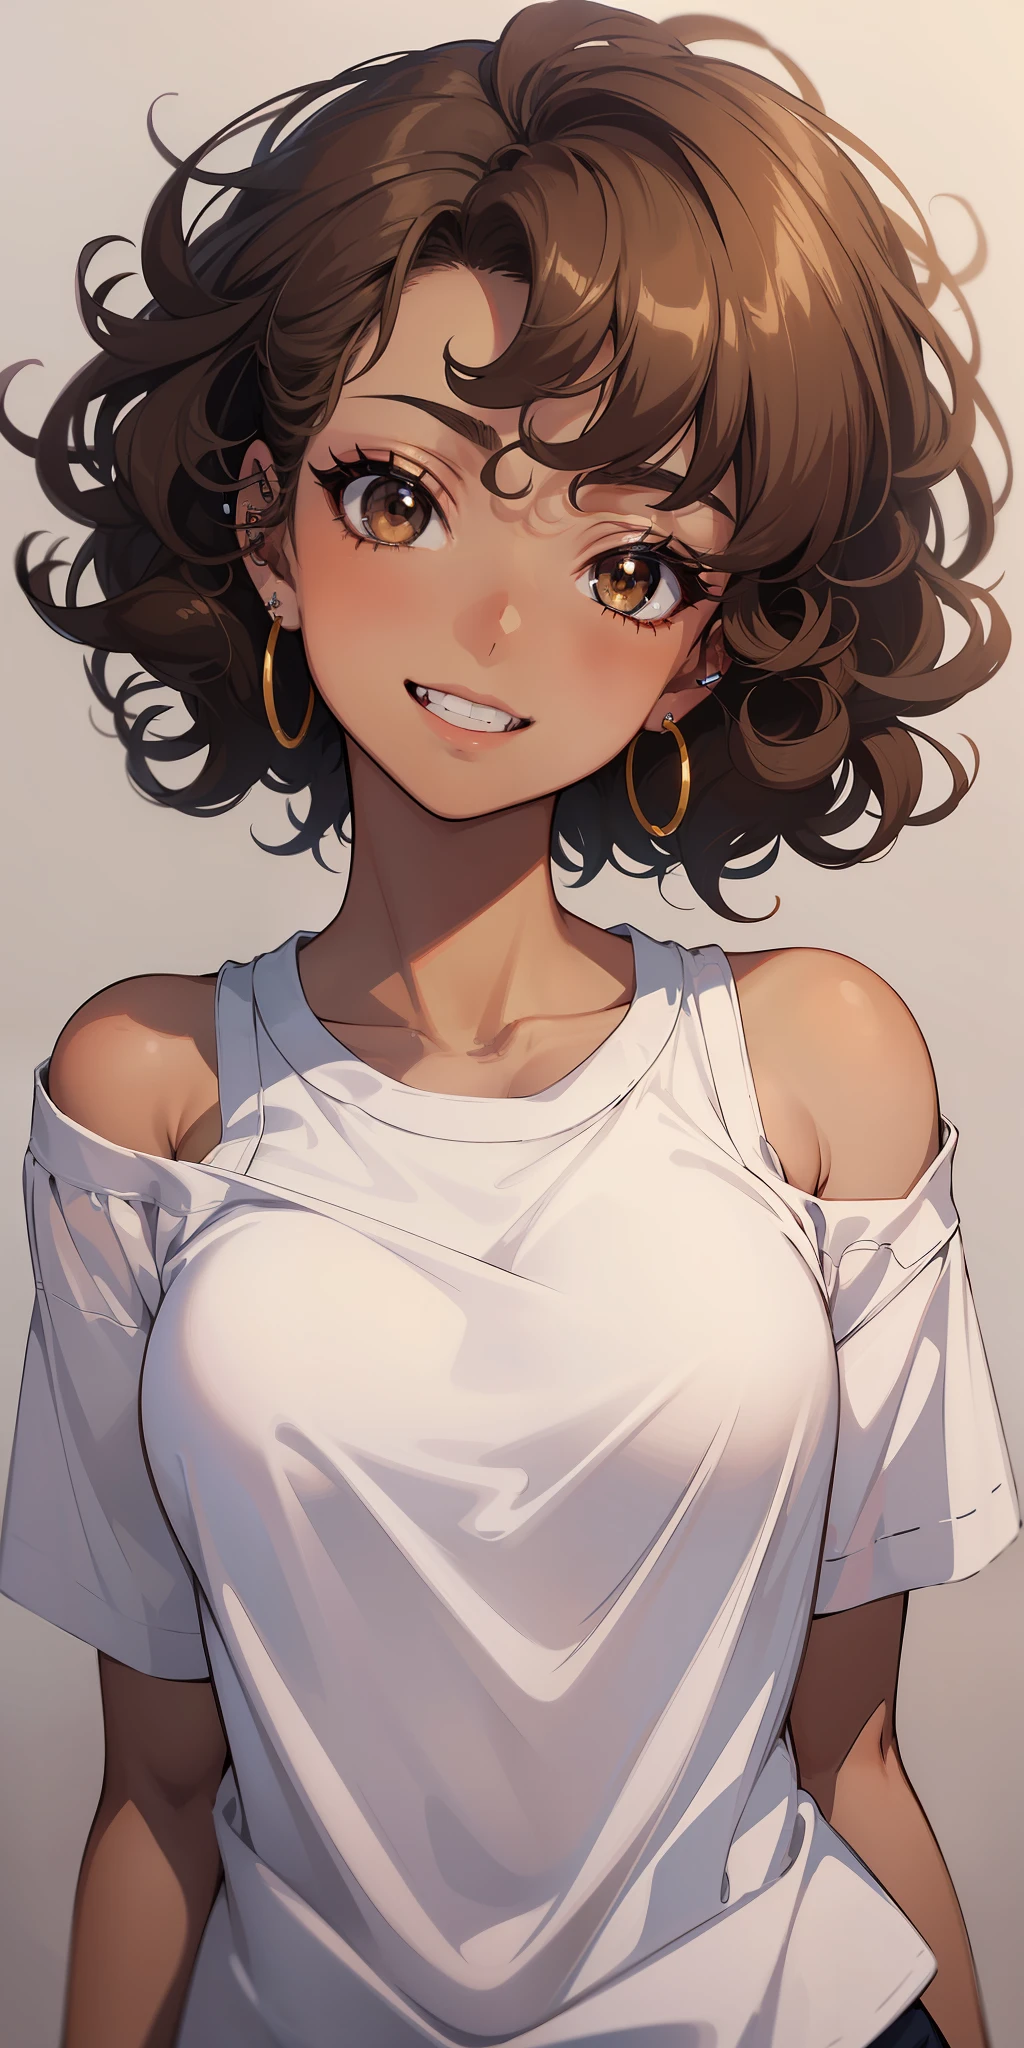 ((masterpiece)), ((best quality)), ((anime profile style)), ((brown skin)), 20 year old girl, ((light brown eyes)), ((perfect)), eyebrow, nose, ear, ((ear piercing)), mouth, smile, ((teeth showing)), ((curly hair)), neck, shoulders, arms, ((white long shirt)), background